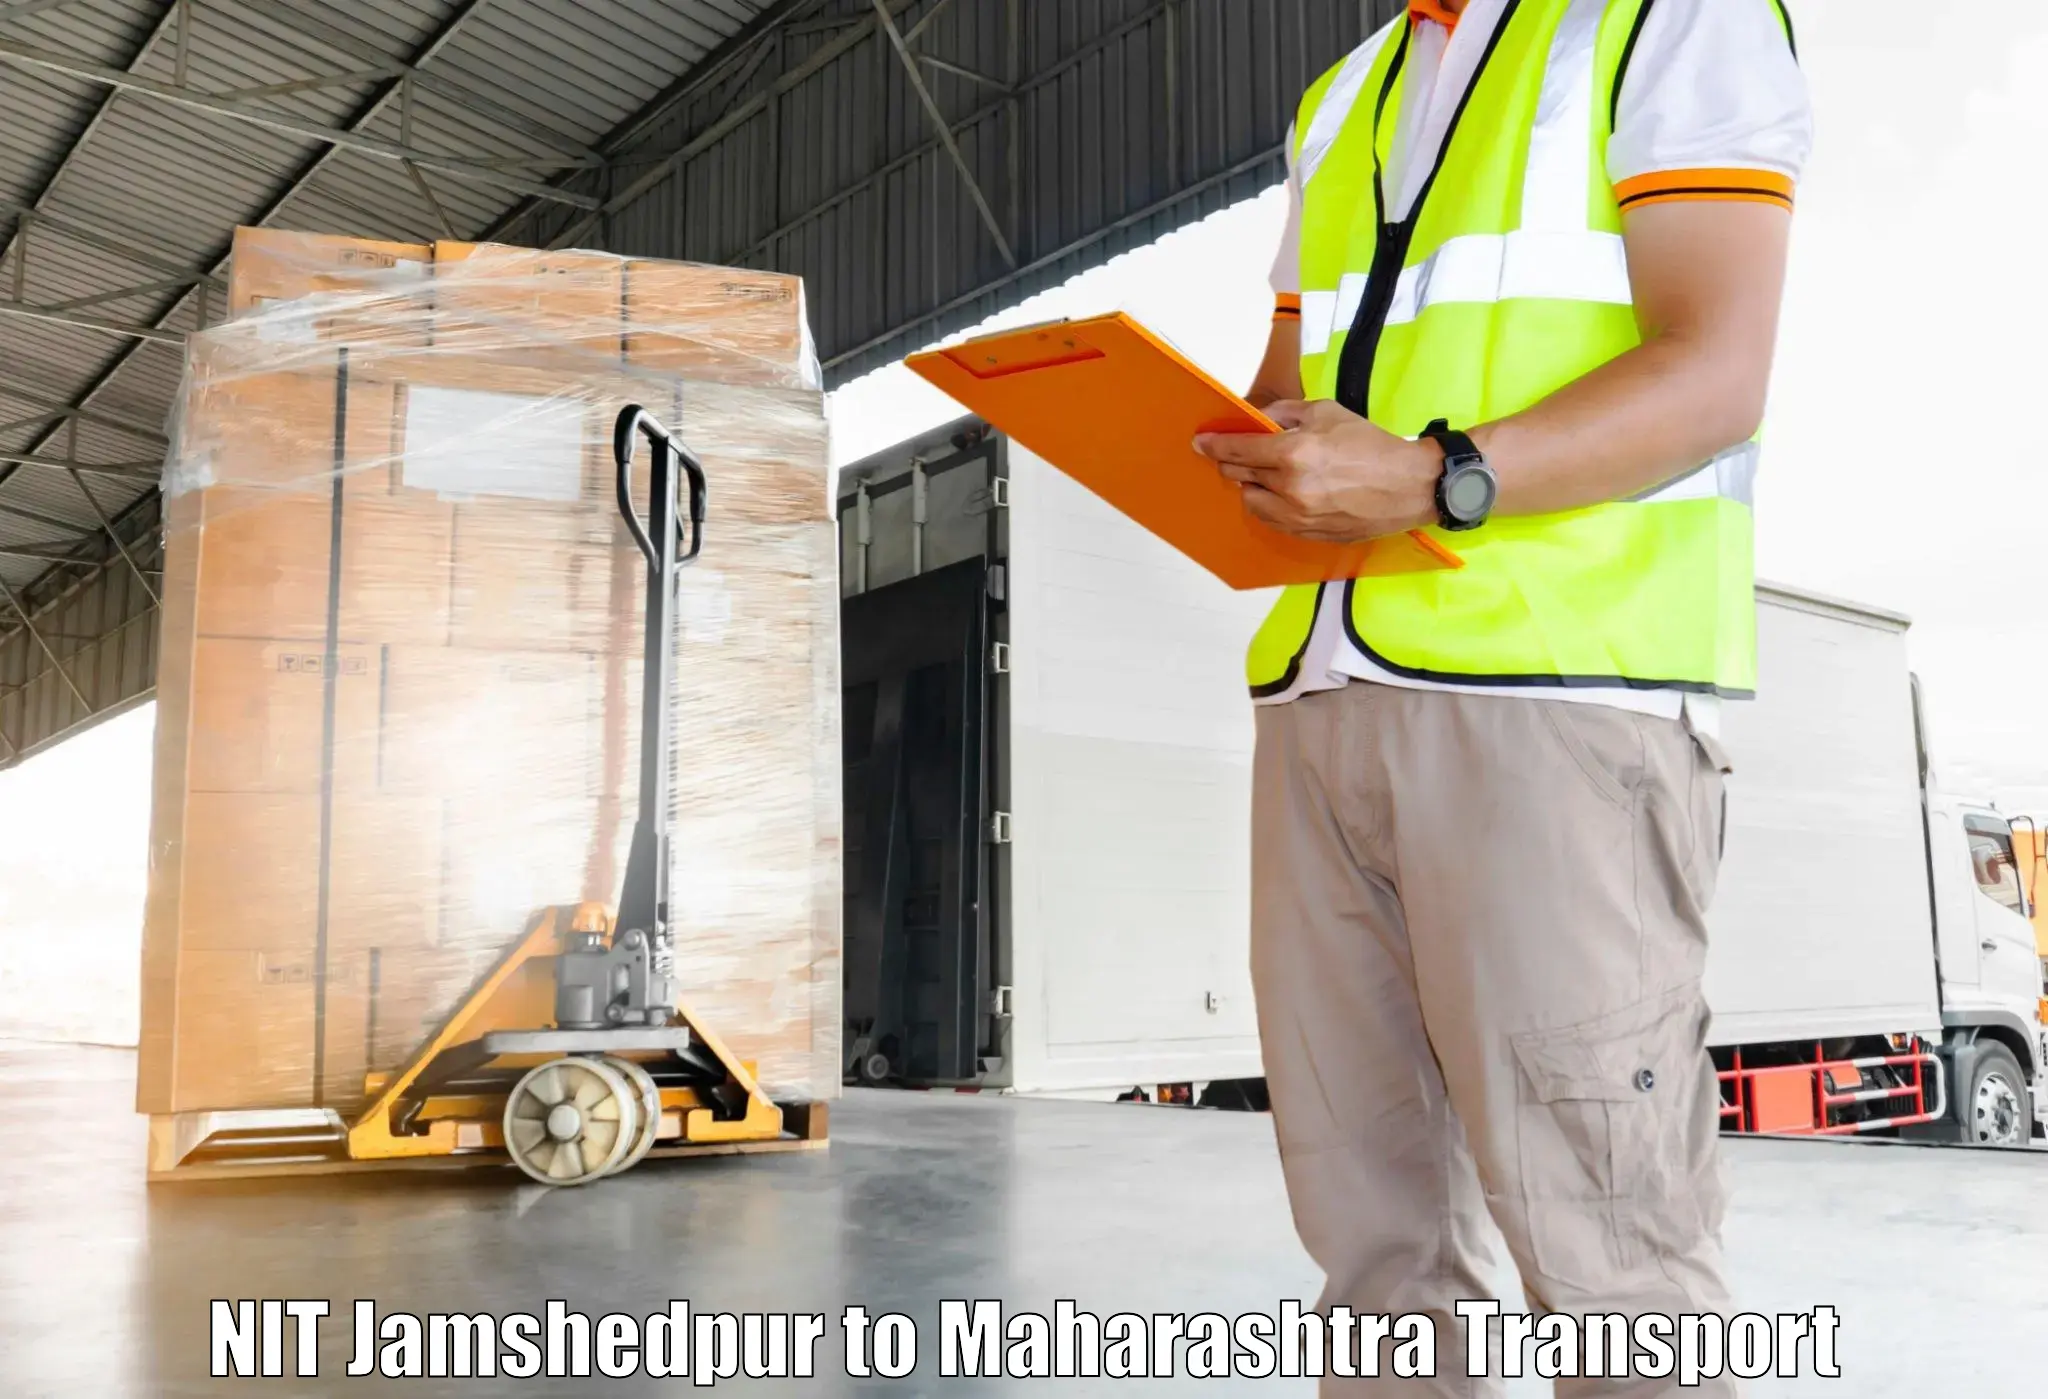 Package delivery services NIT Jamshedpur to Waranga Phata